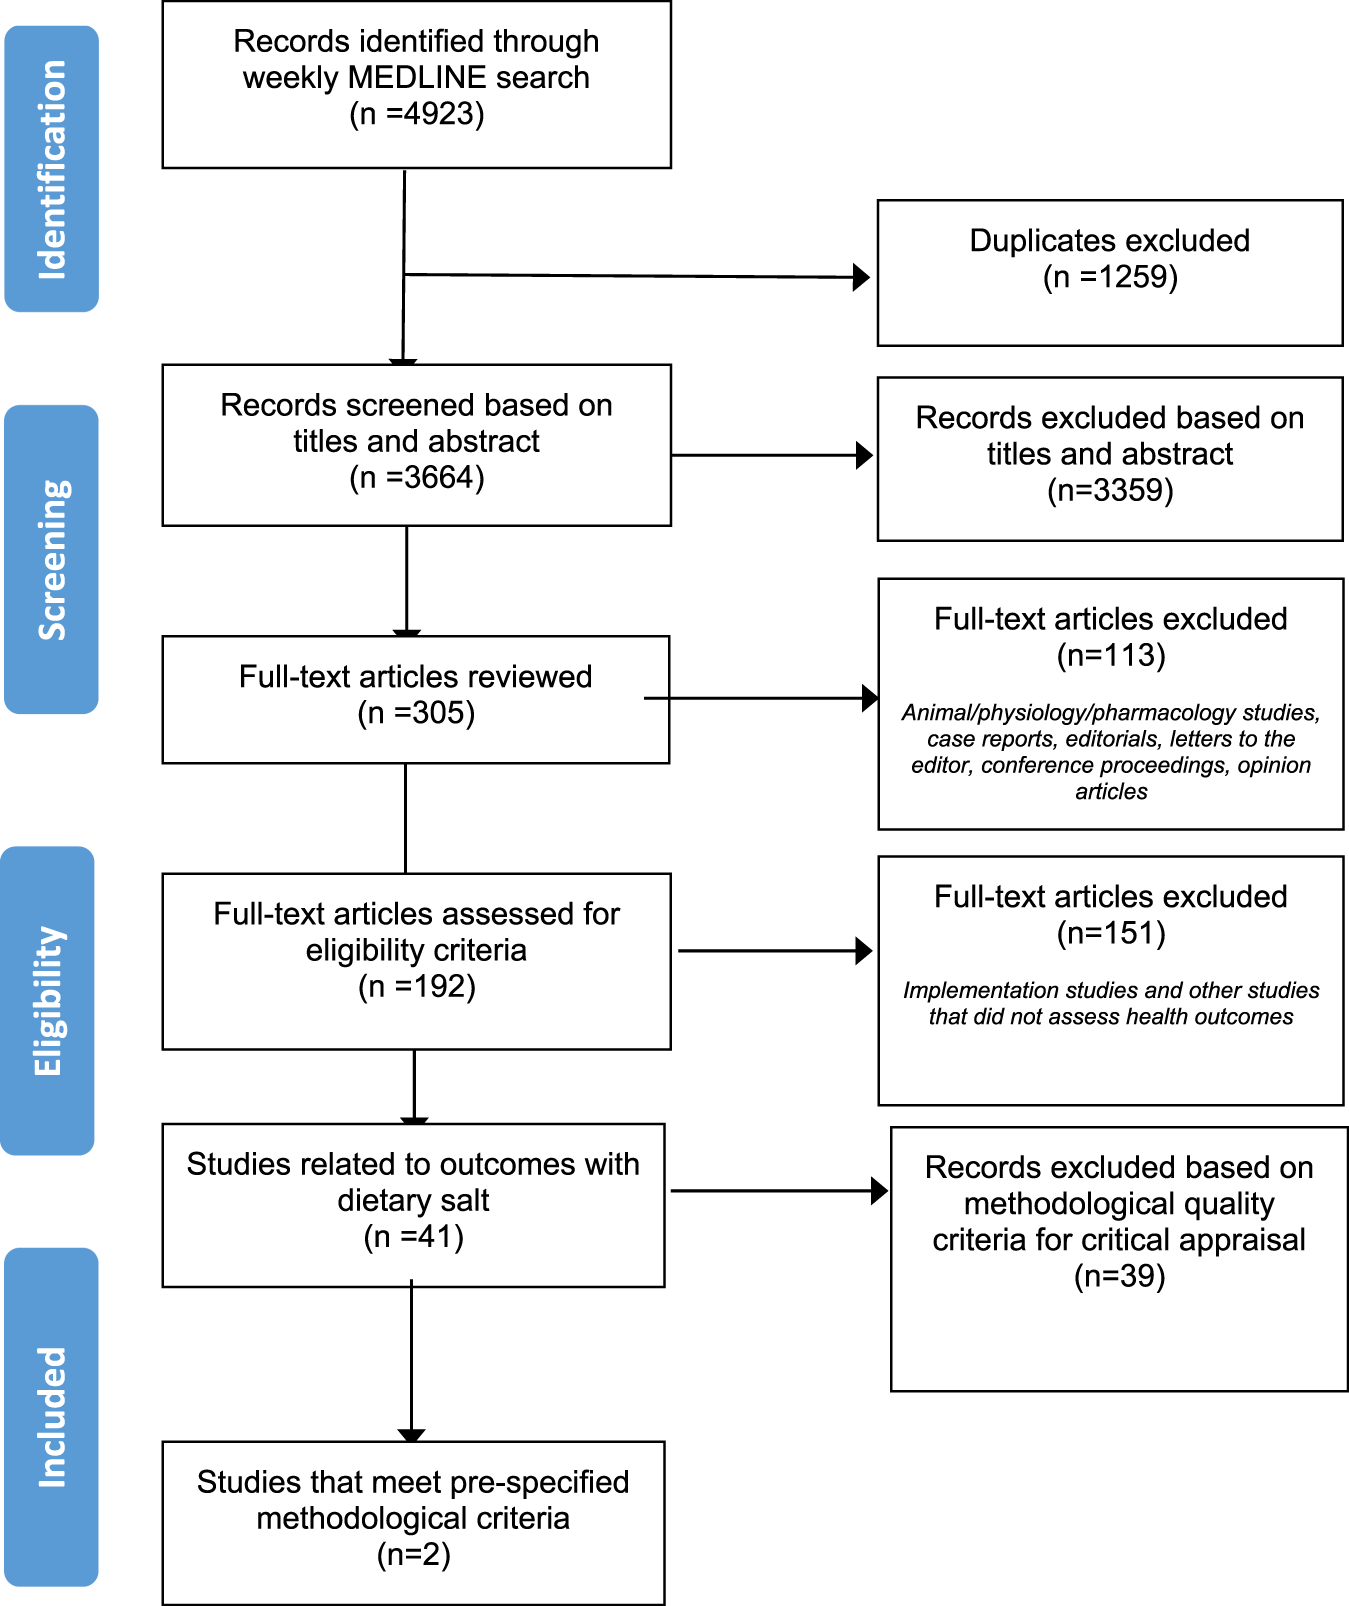 The World Hypertension League Science of Salt: a regularly updated  systematic review of salt and health outcomes studies (Sept 2019 to Dec  2020) | Journal of Human Hypertension